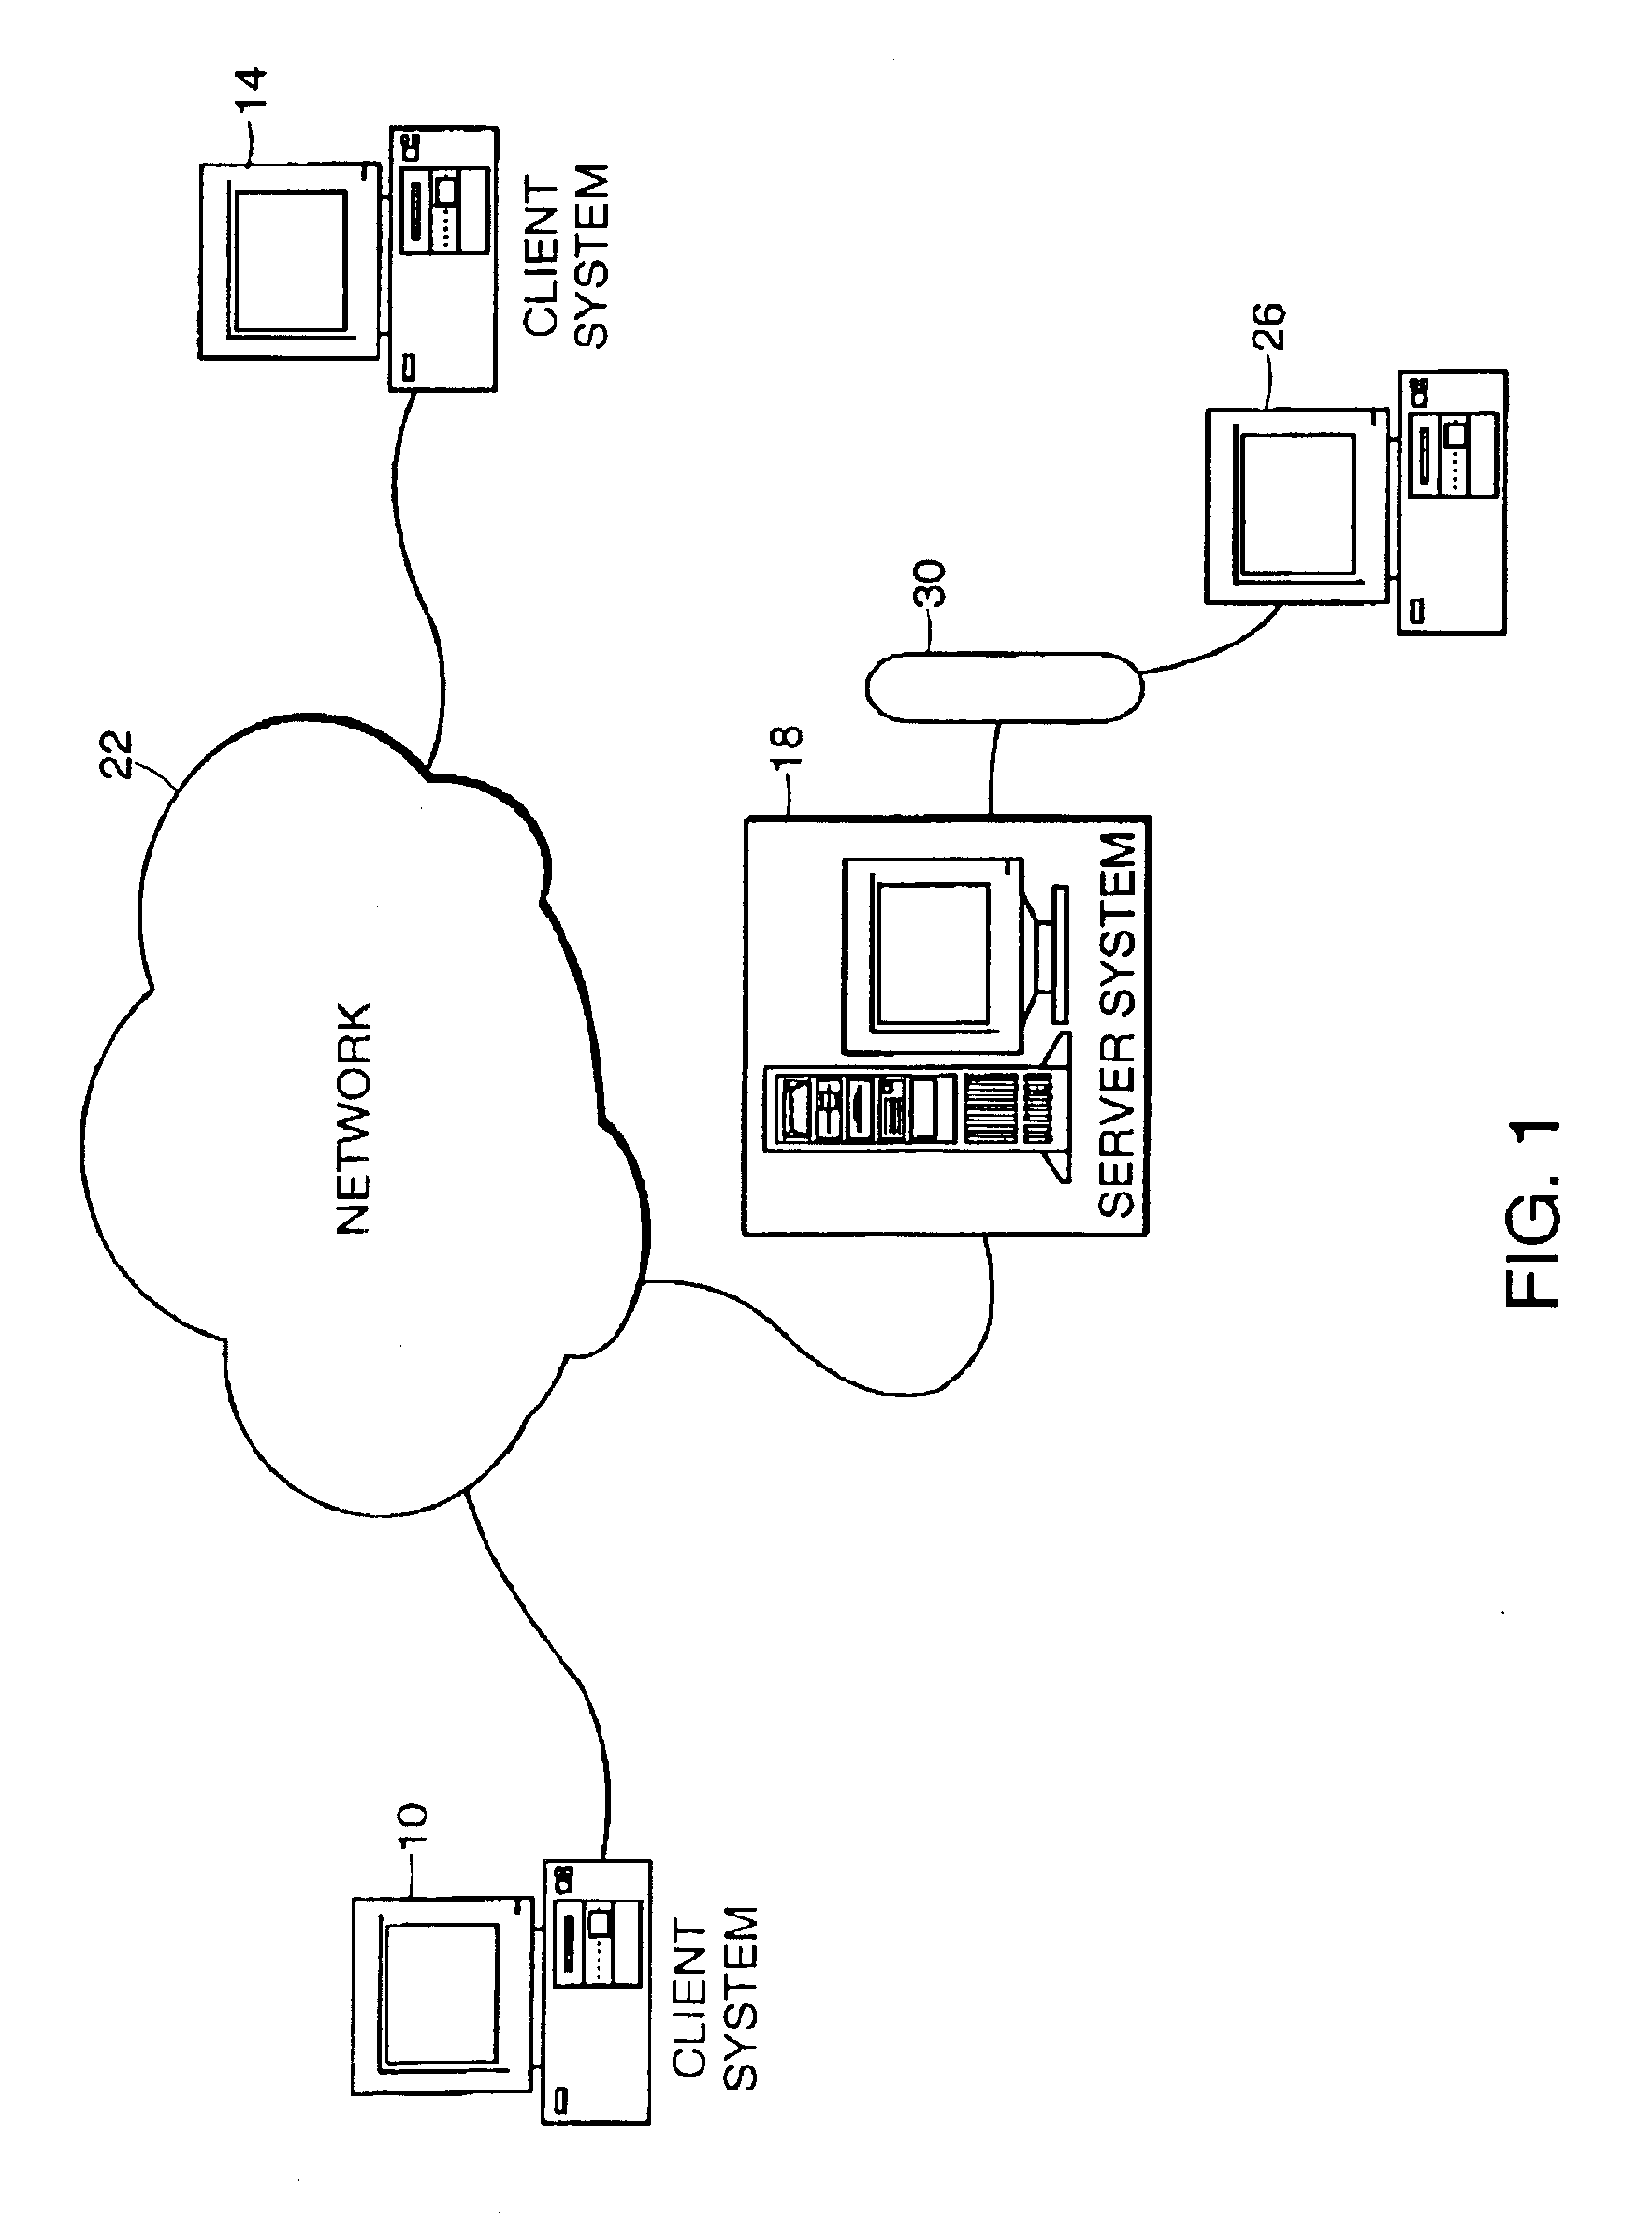 System and method of matching teachers with students to facilitate conducting online private instruction over a global network